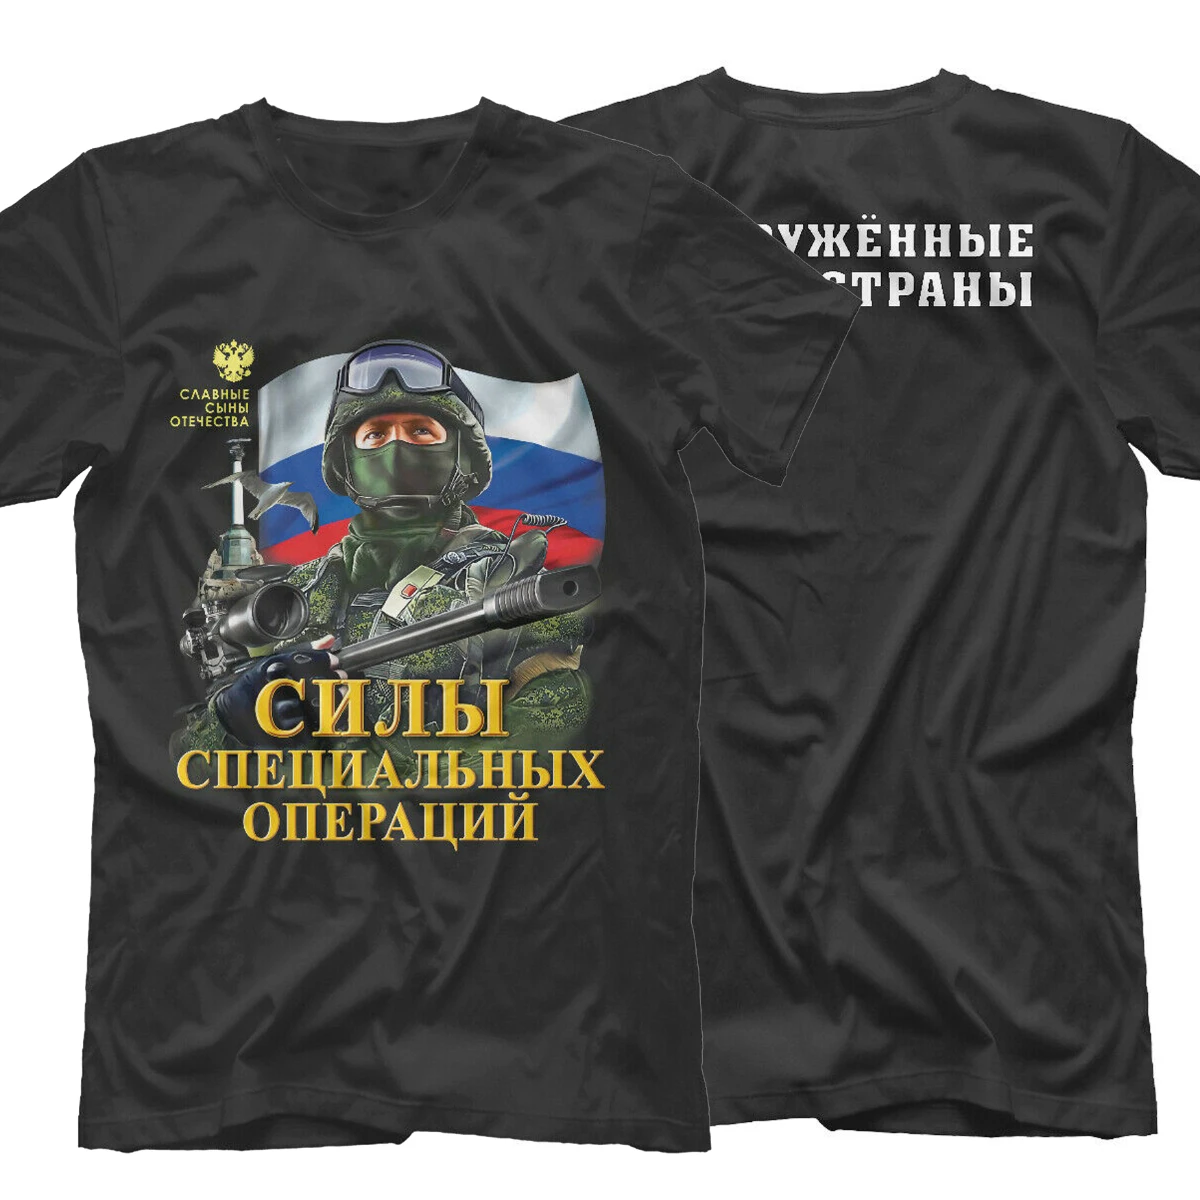 

Russian Army Anti Terror Special Operations Forces T-Shirt. Summer Cotton Short Sleeve O-Neck Mens T Shirt New S-3XL